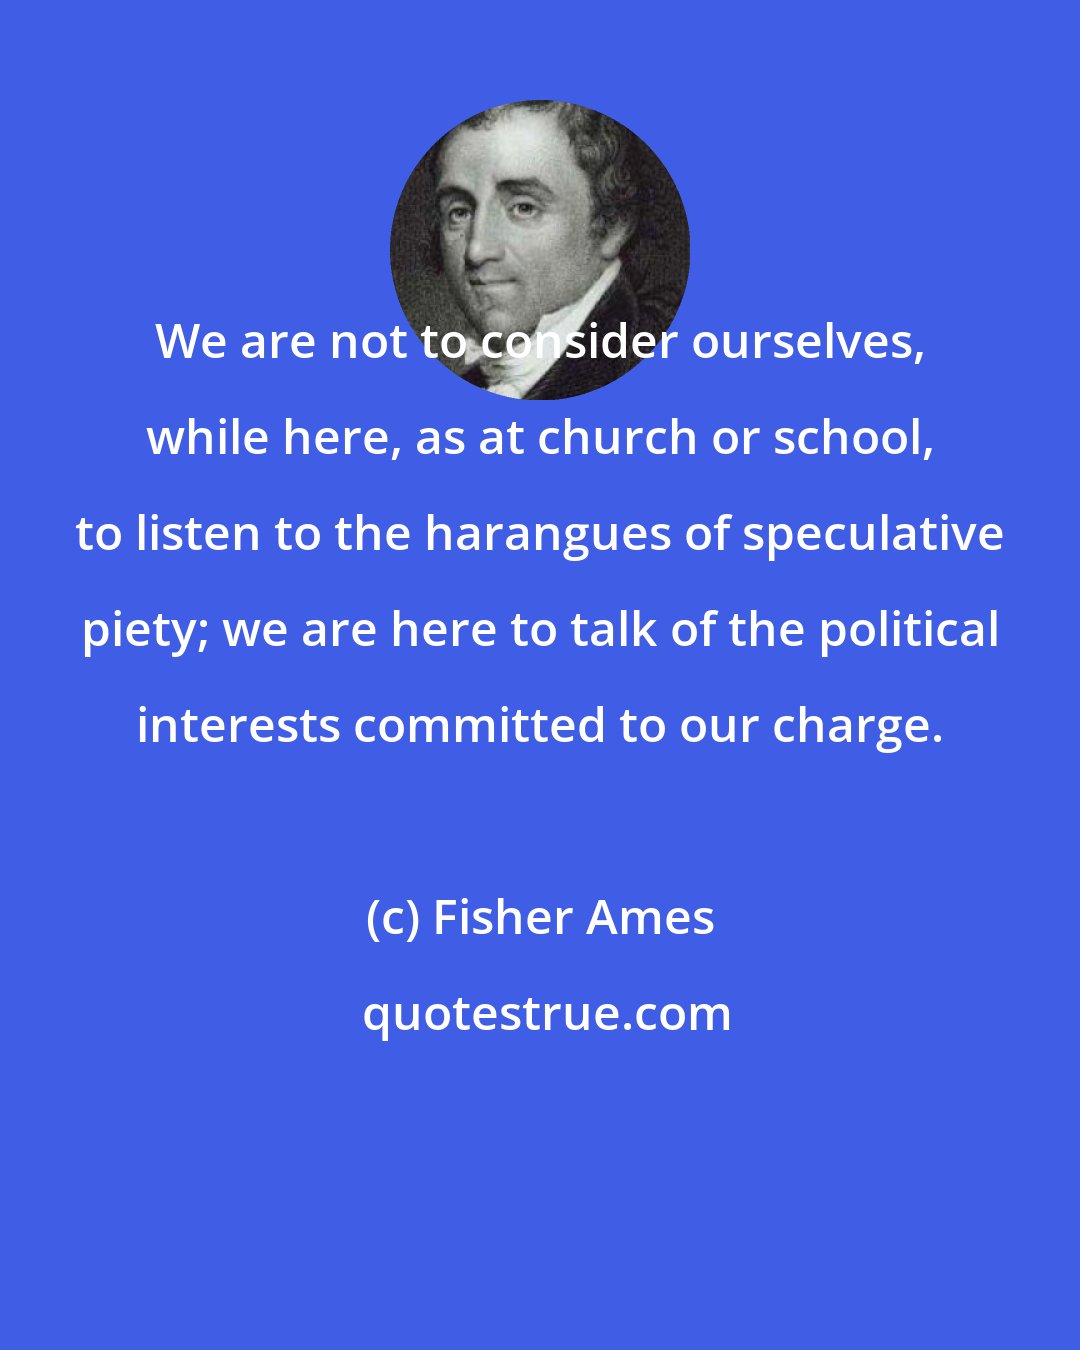 Fisher Ames: We are not to consider ourselves, while here, as at church or school, to listen to the harangues of speculative piety; we are here to talk of the political interests committed to our charge.